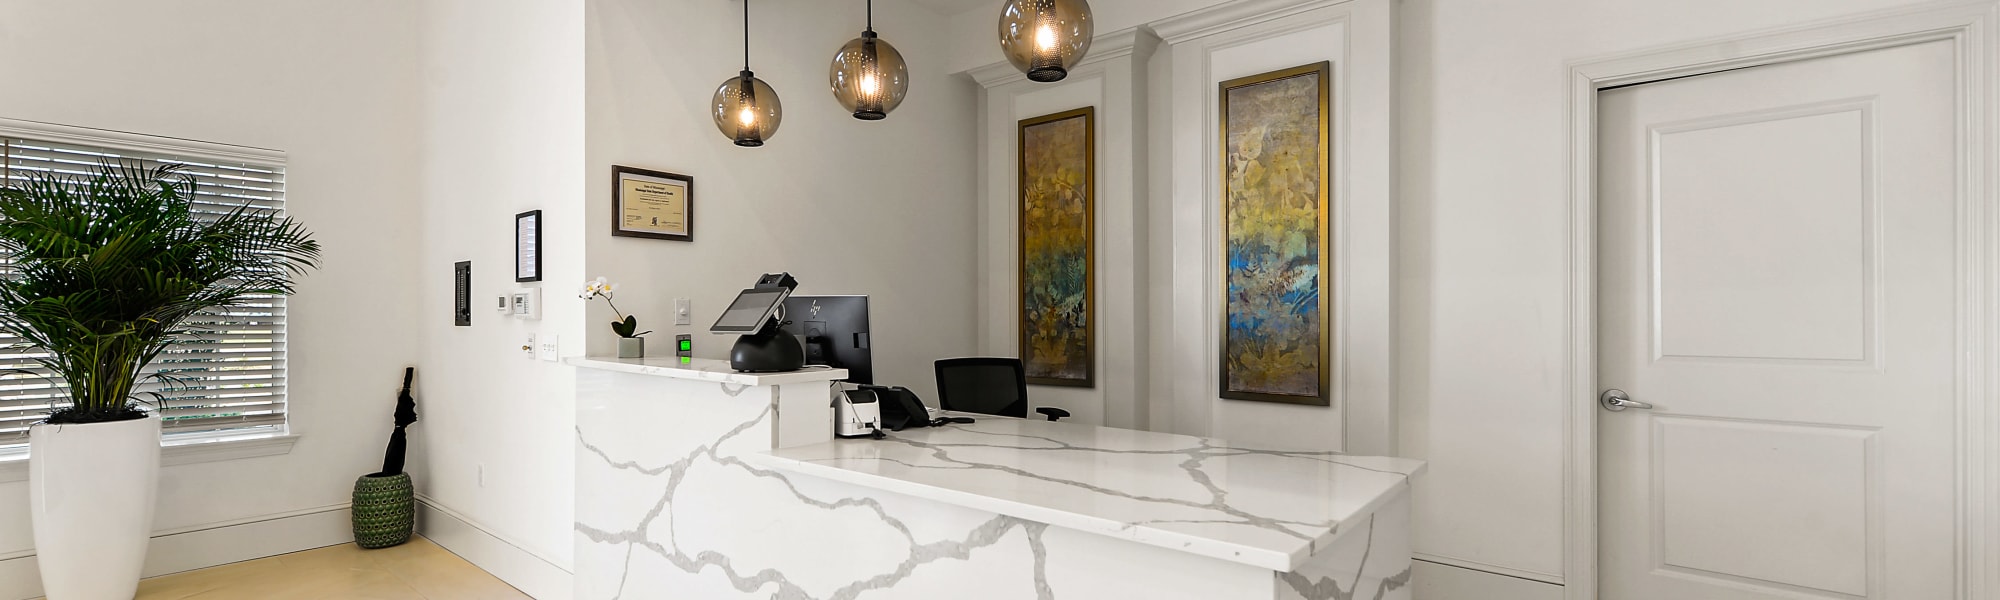 Reception area with a large marble desk and art hanging from the walls at The Blake at Biloxi in Biloxi, Mississippi